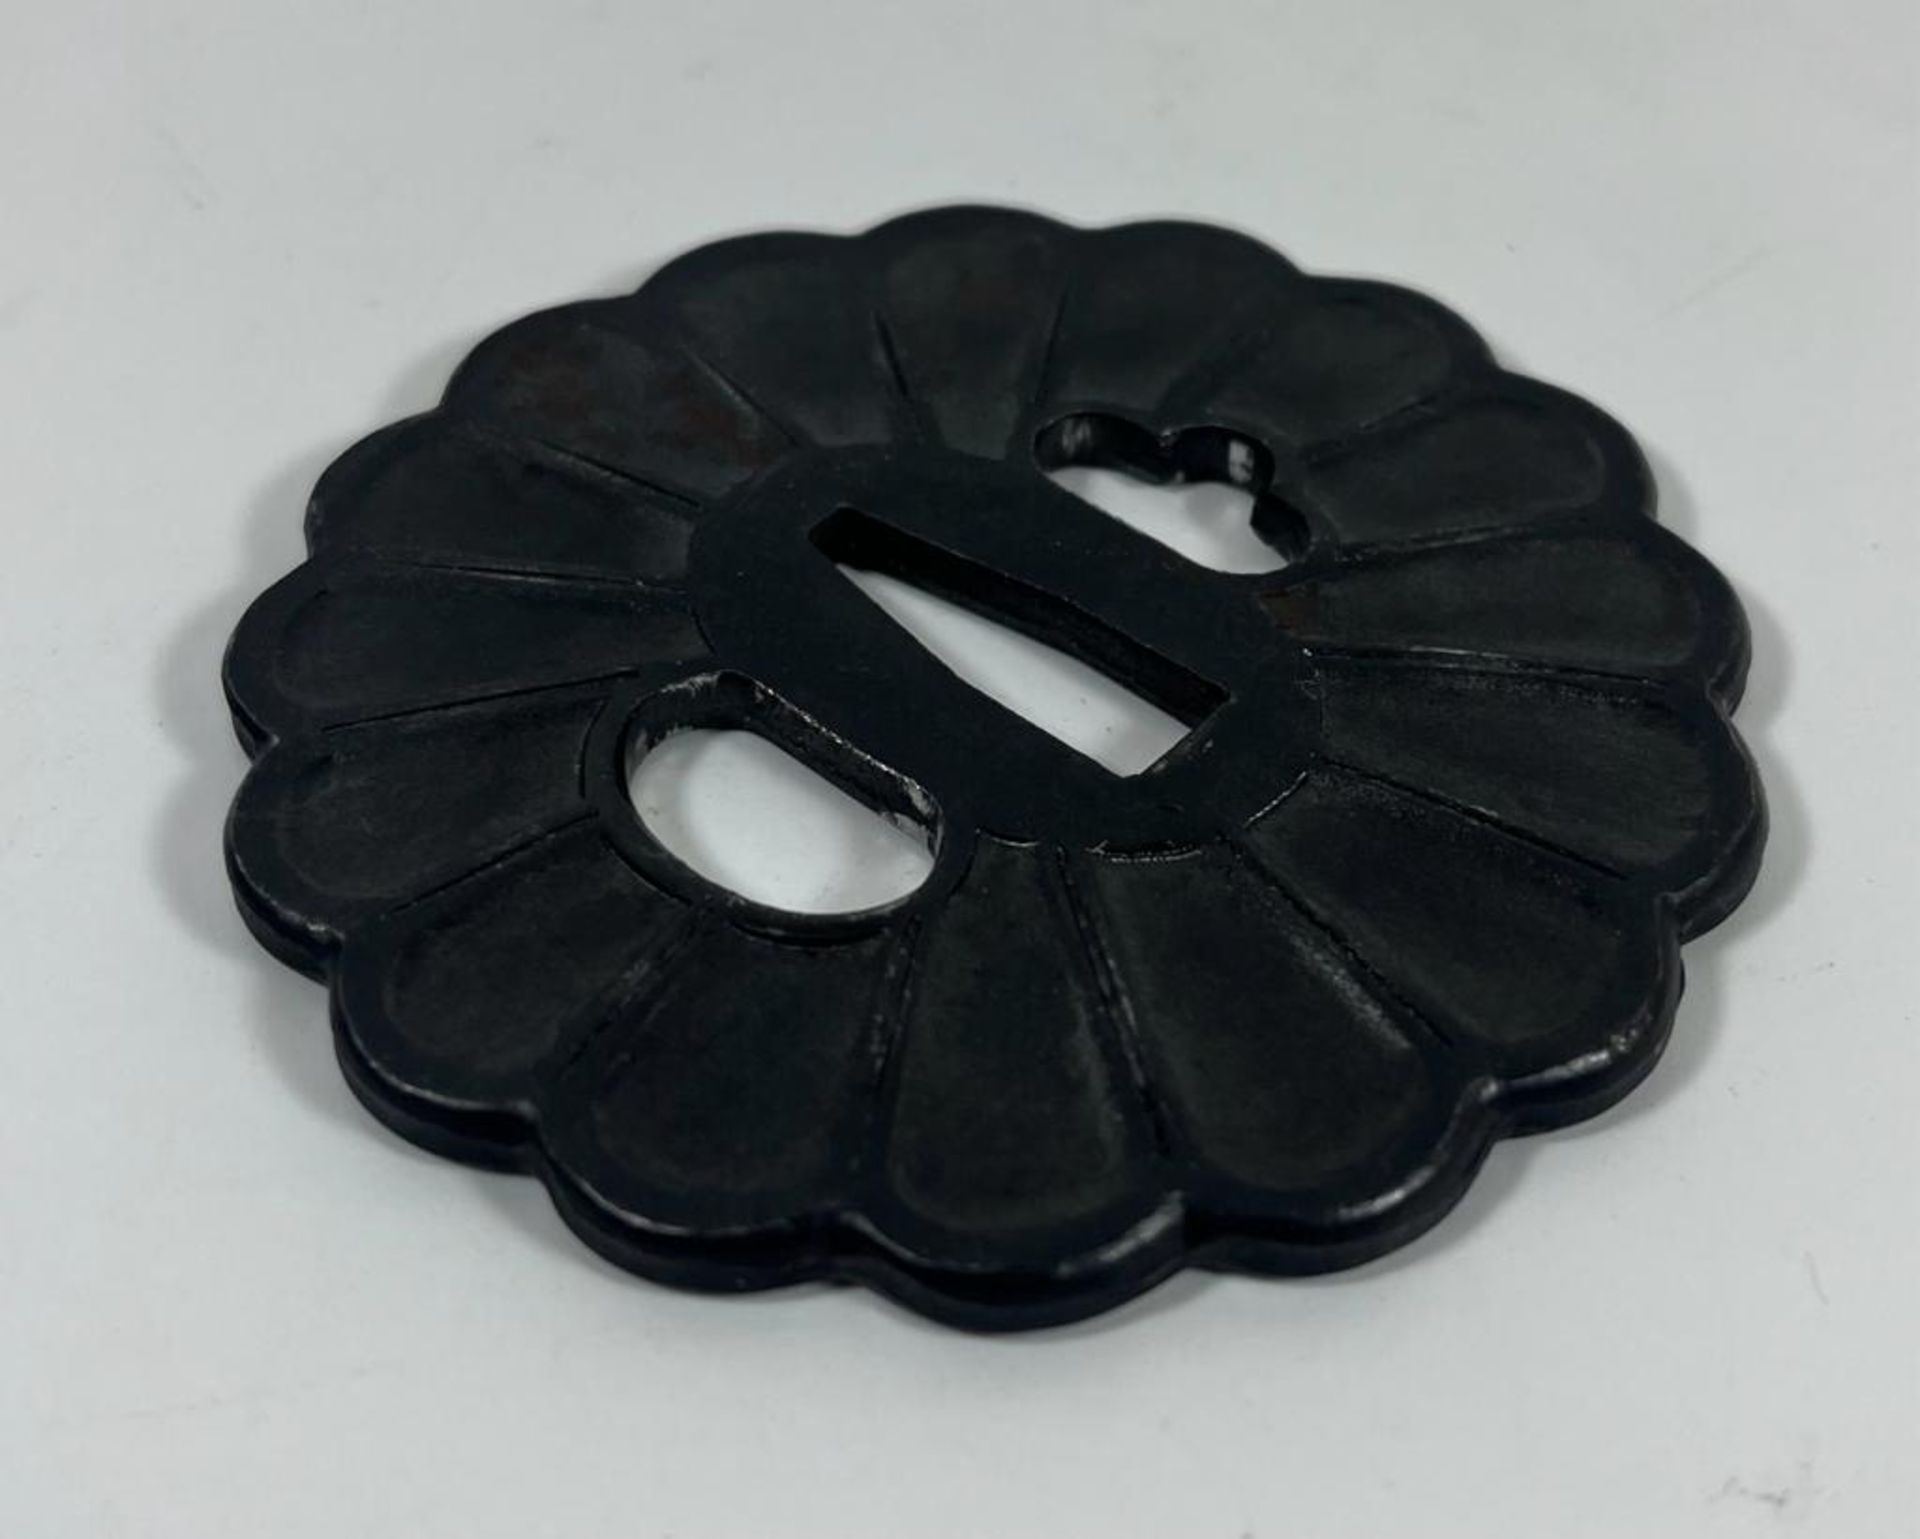 A JAPANESE IRON TSUBA WITH FLUTED DESIGN, DIAMETER 8 CM - Image 2 of 3